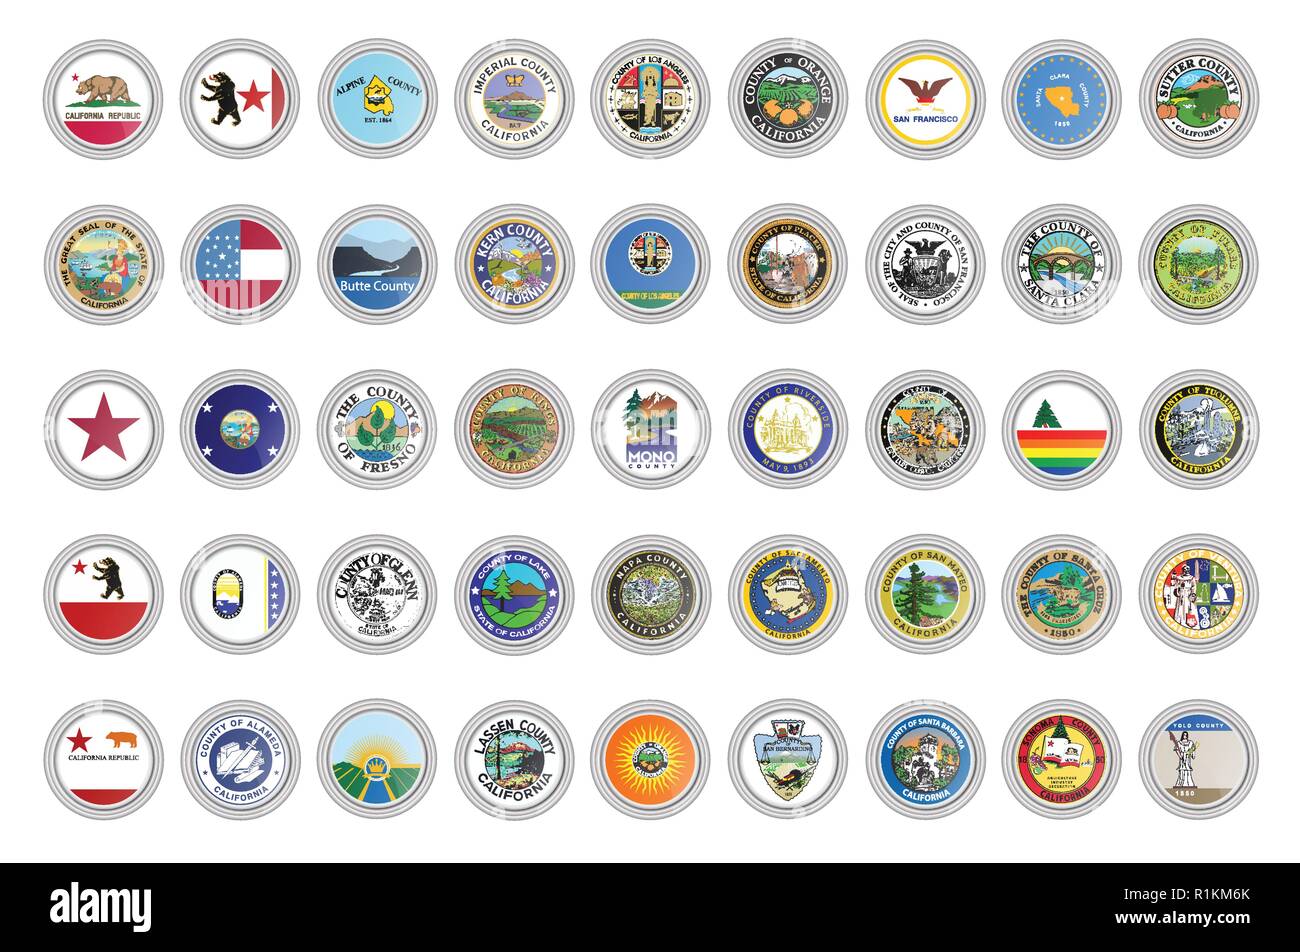 Set of vector icons. Flags and seals of California state, USA. 3D illustration. Stock Vector